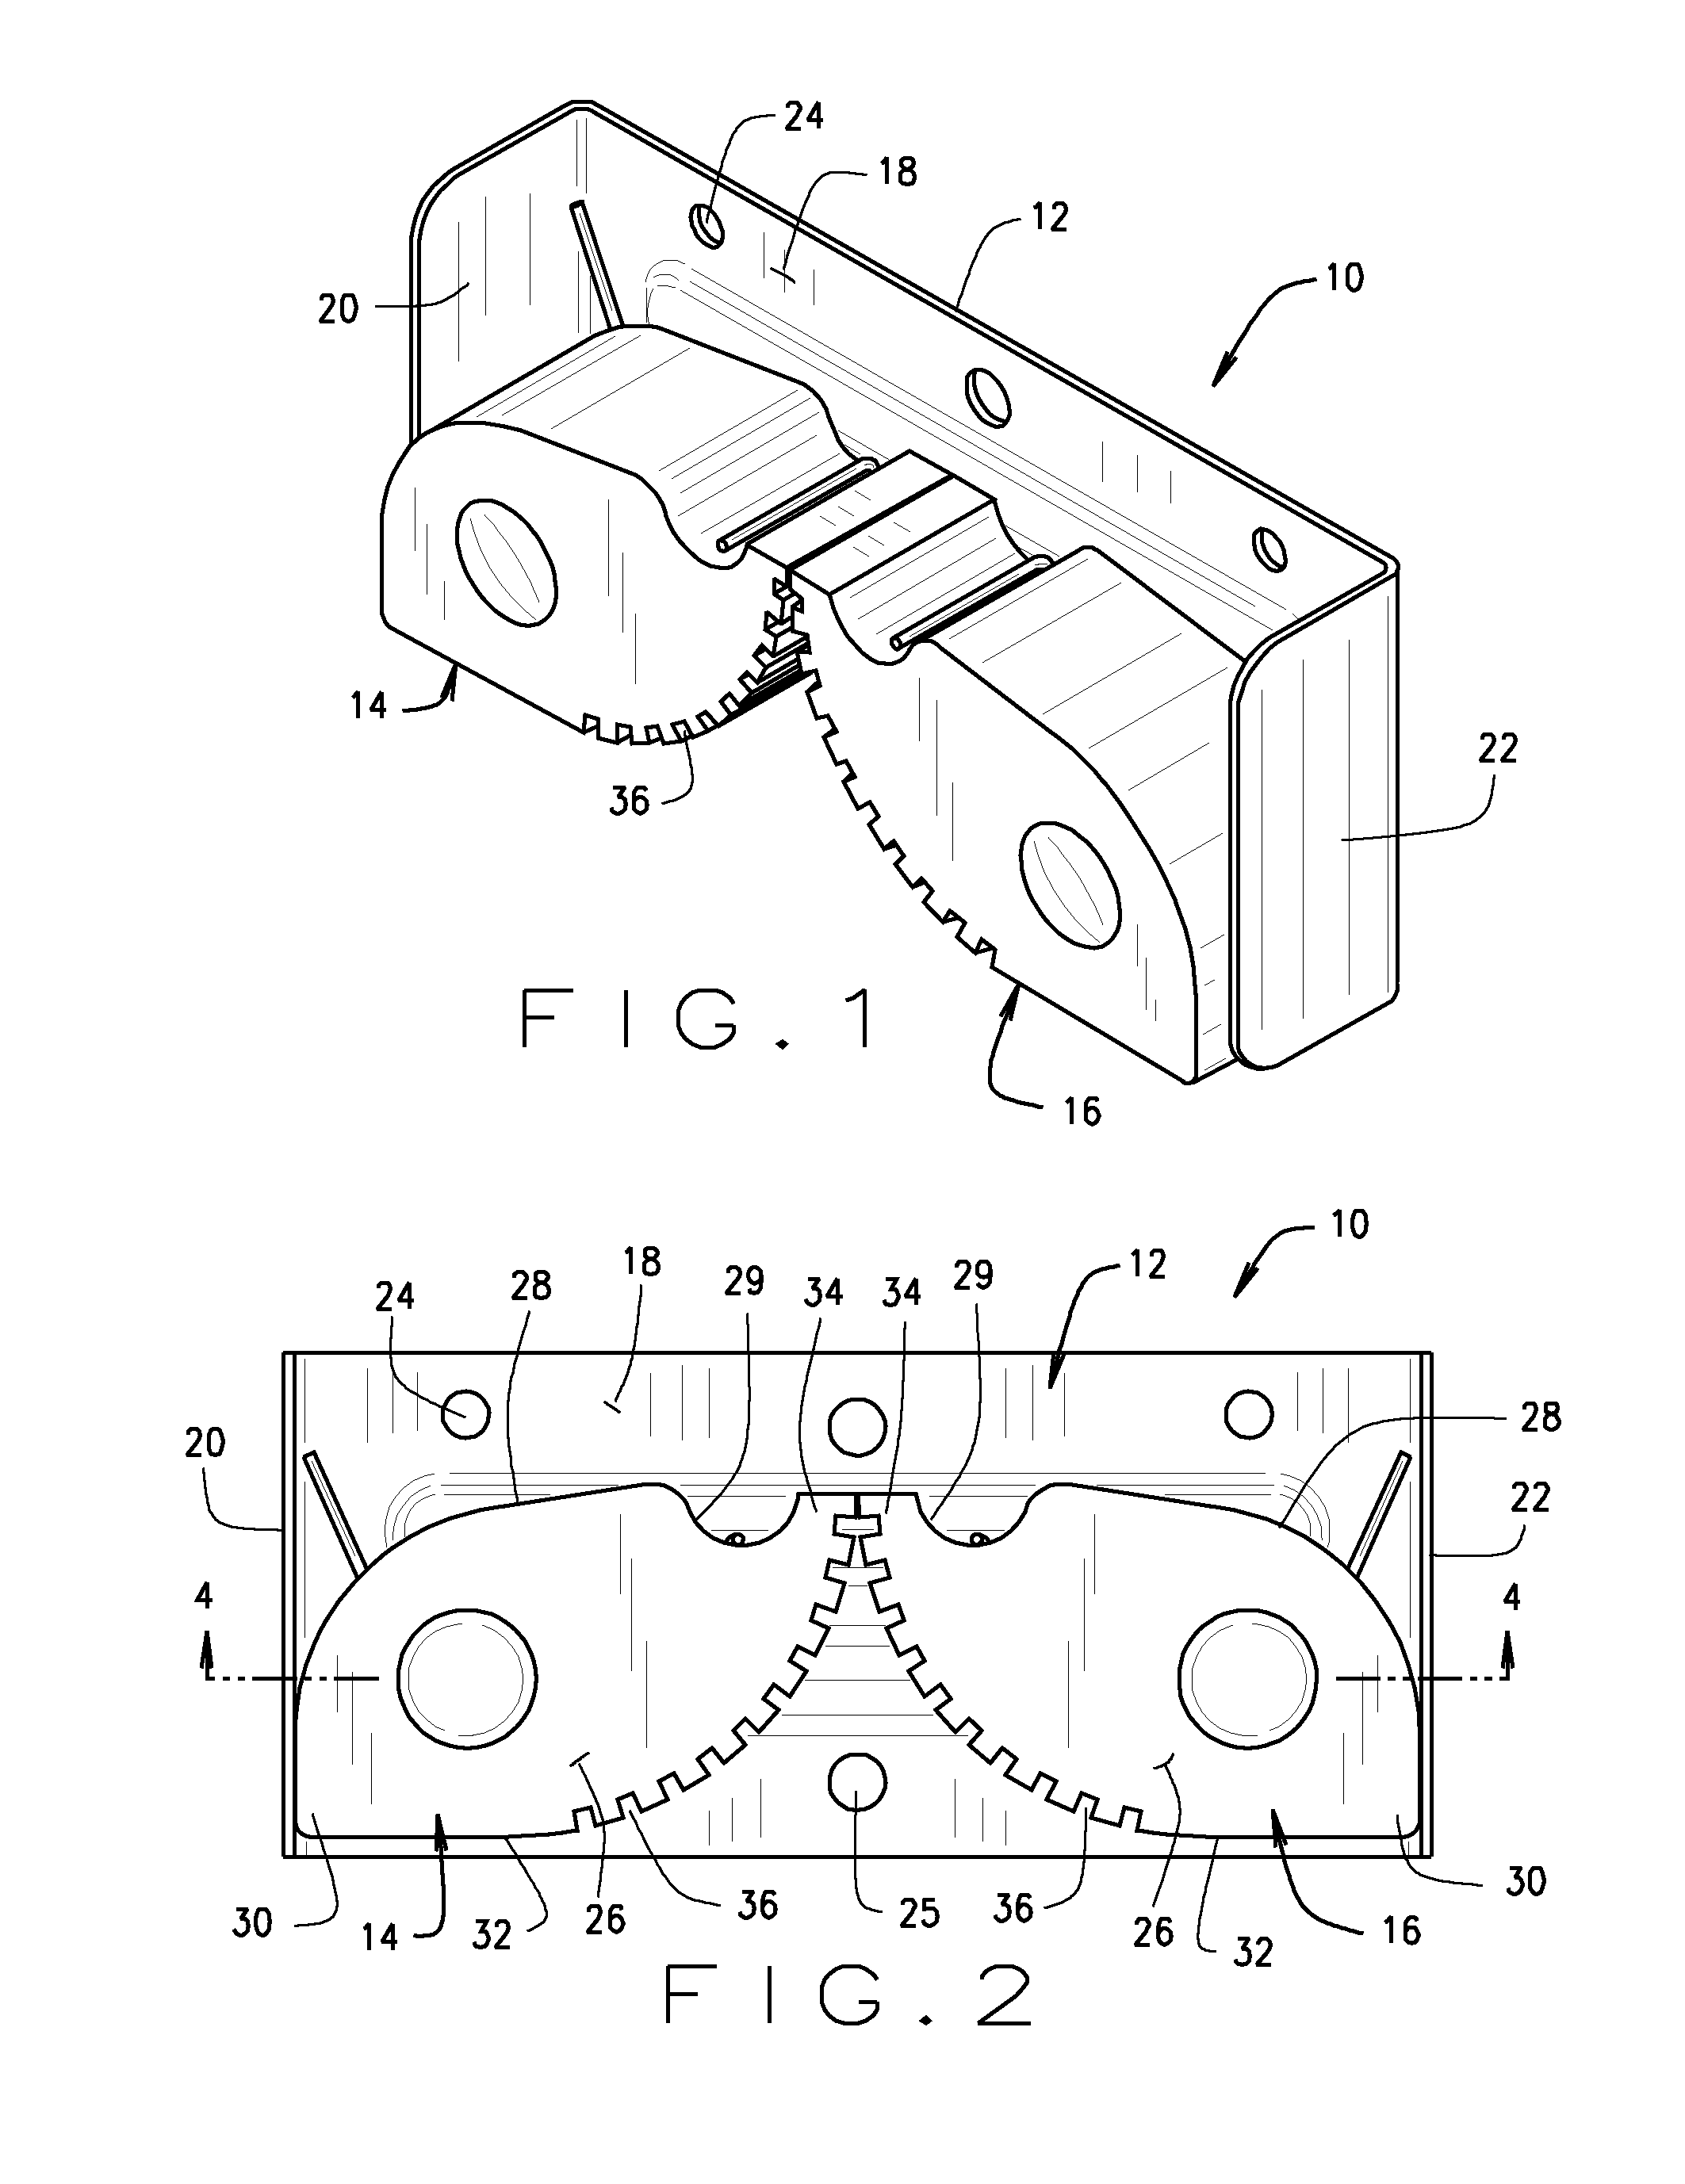 Holder for variable sizes of tools and implements